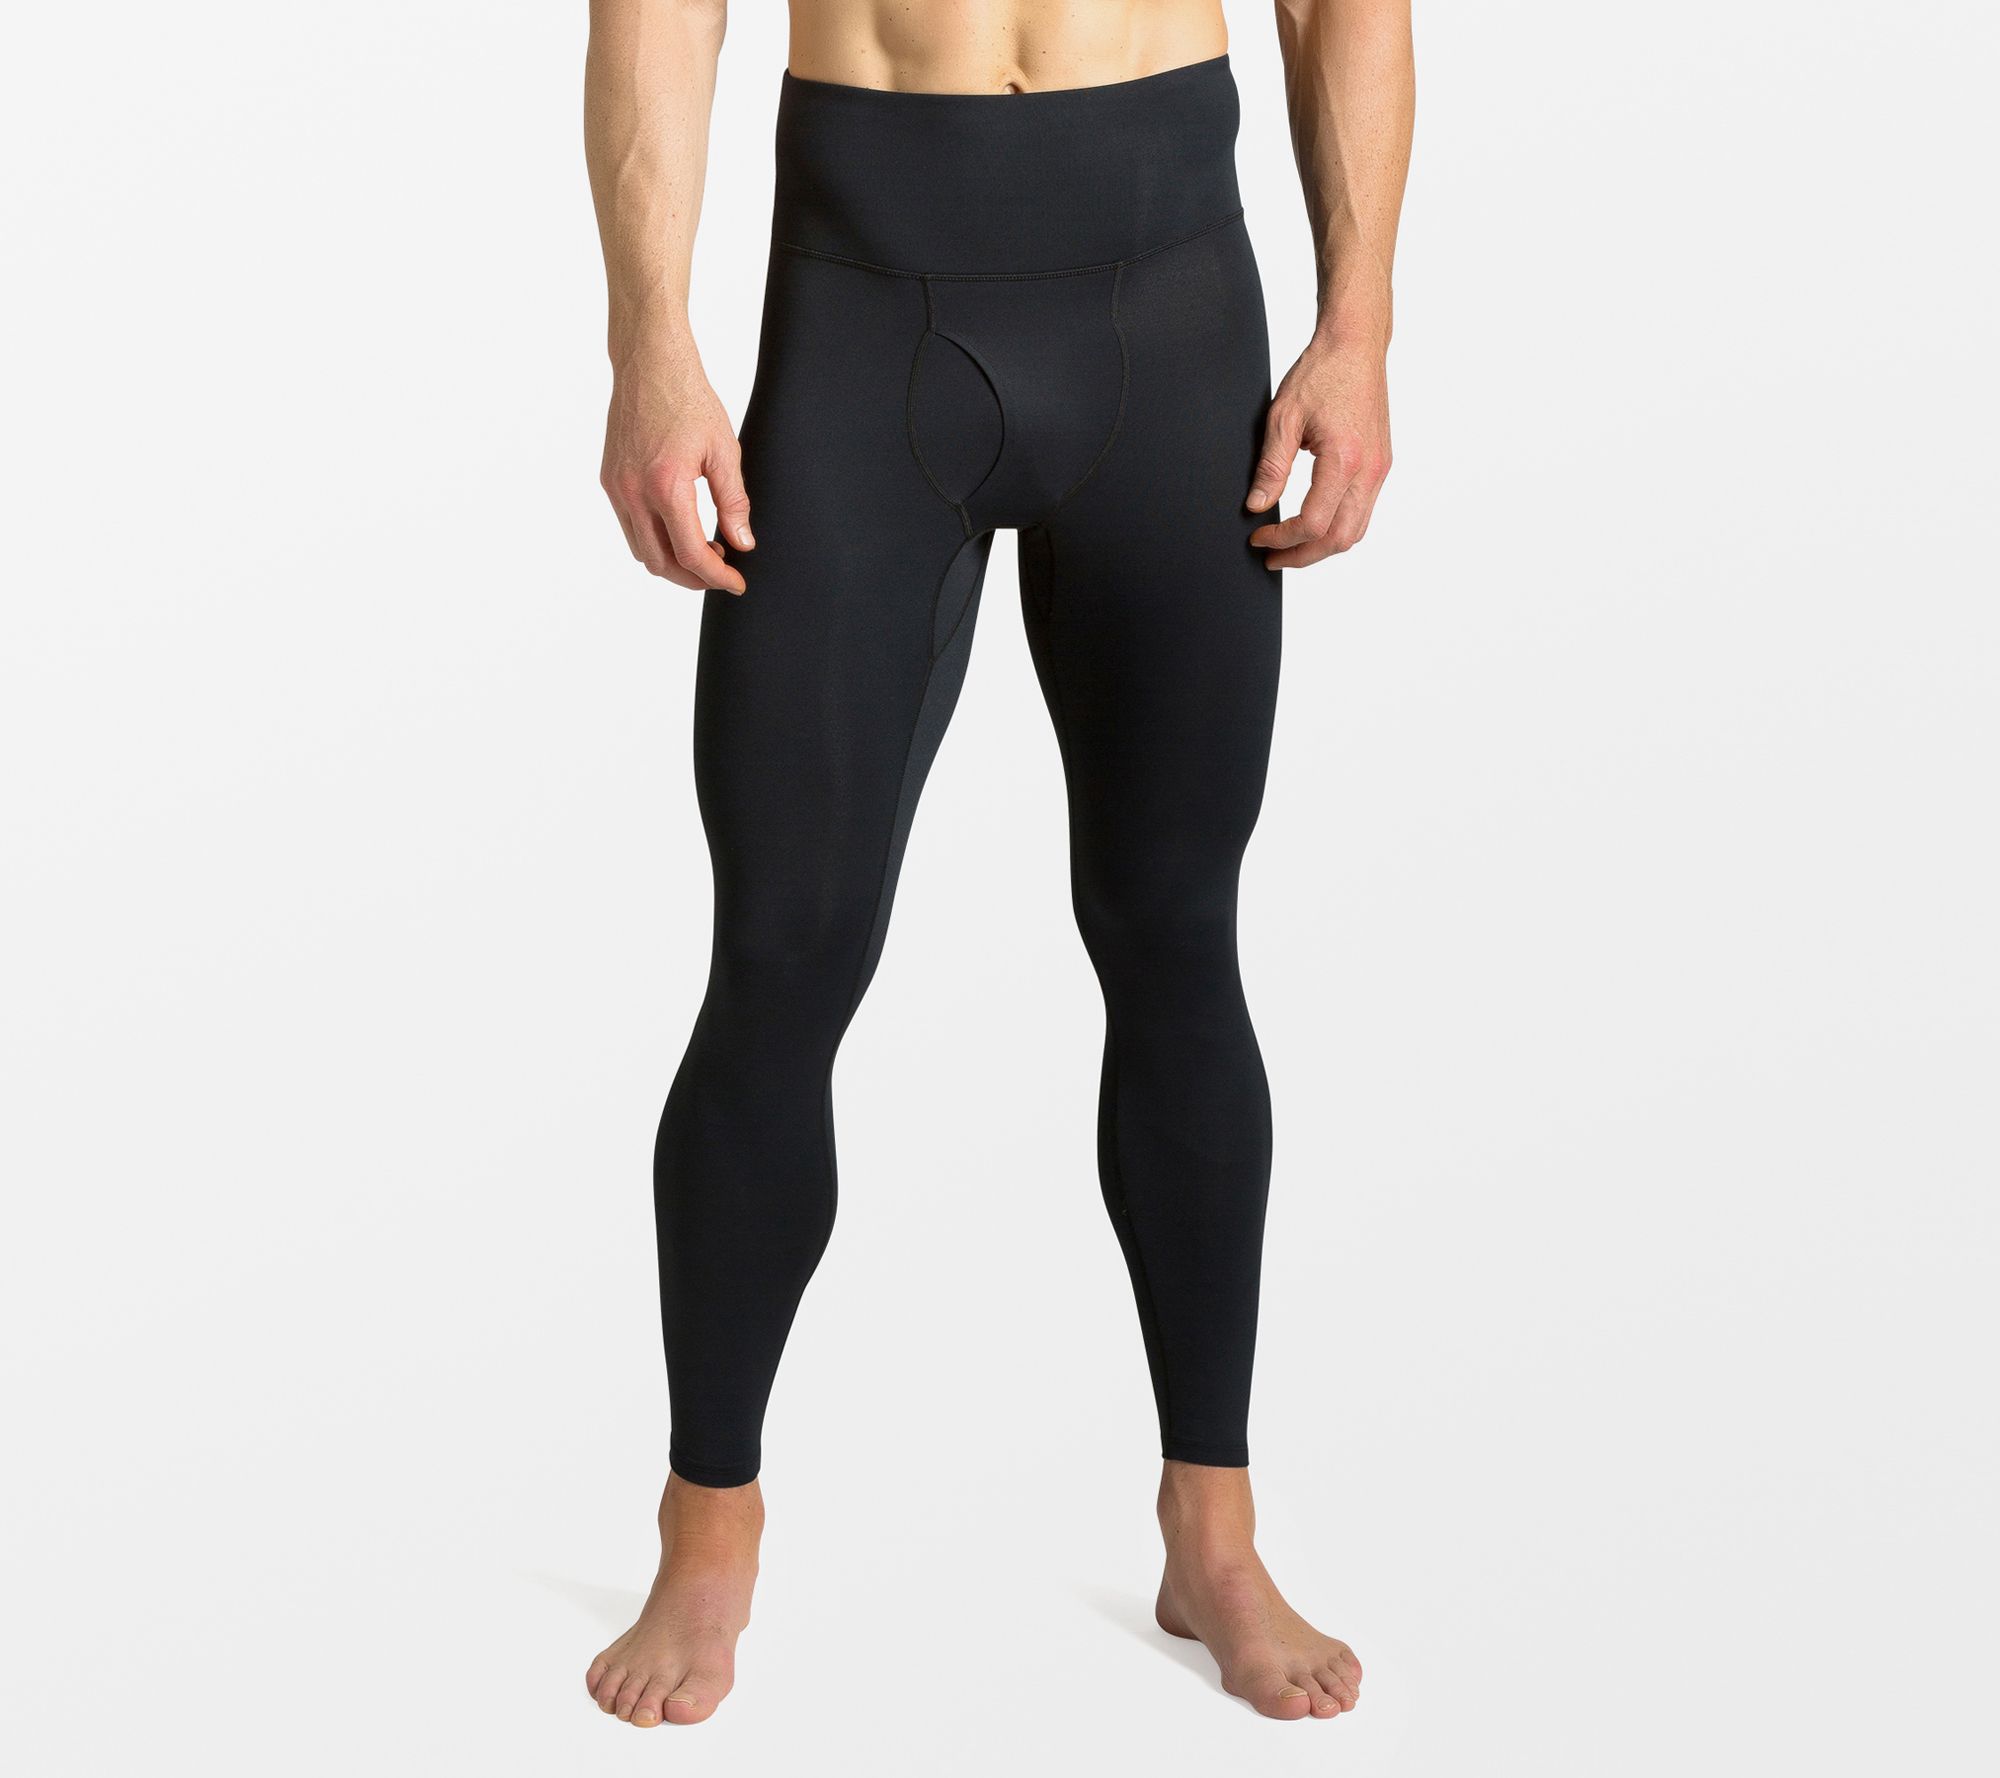 Tommie Copper Men's Ultra-Fit Lower Back Support Tights 